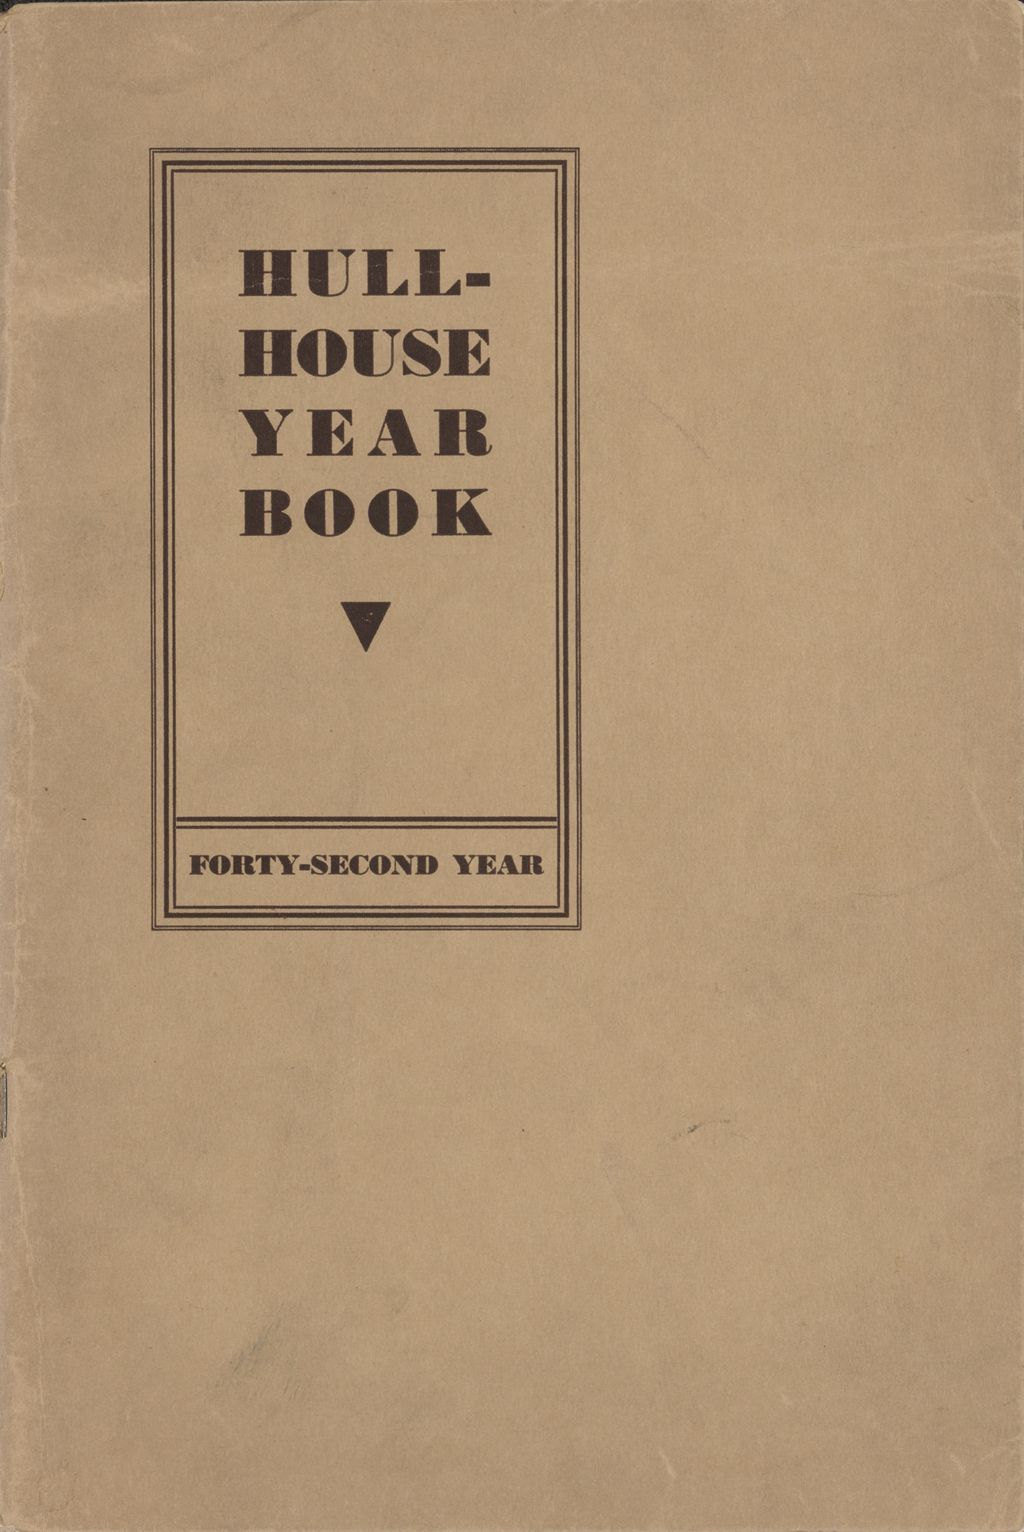 Miniature of Hull-House Year Book, 1930-1931